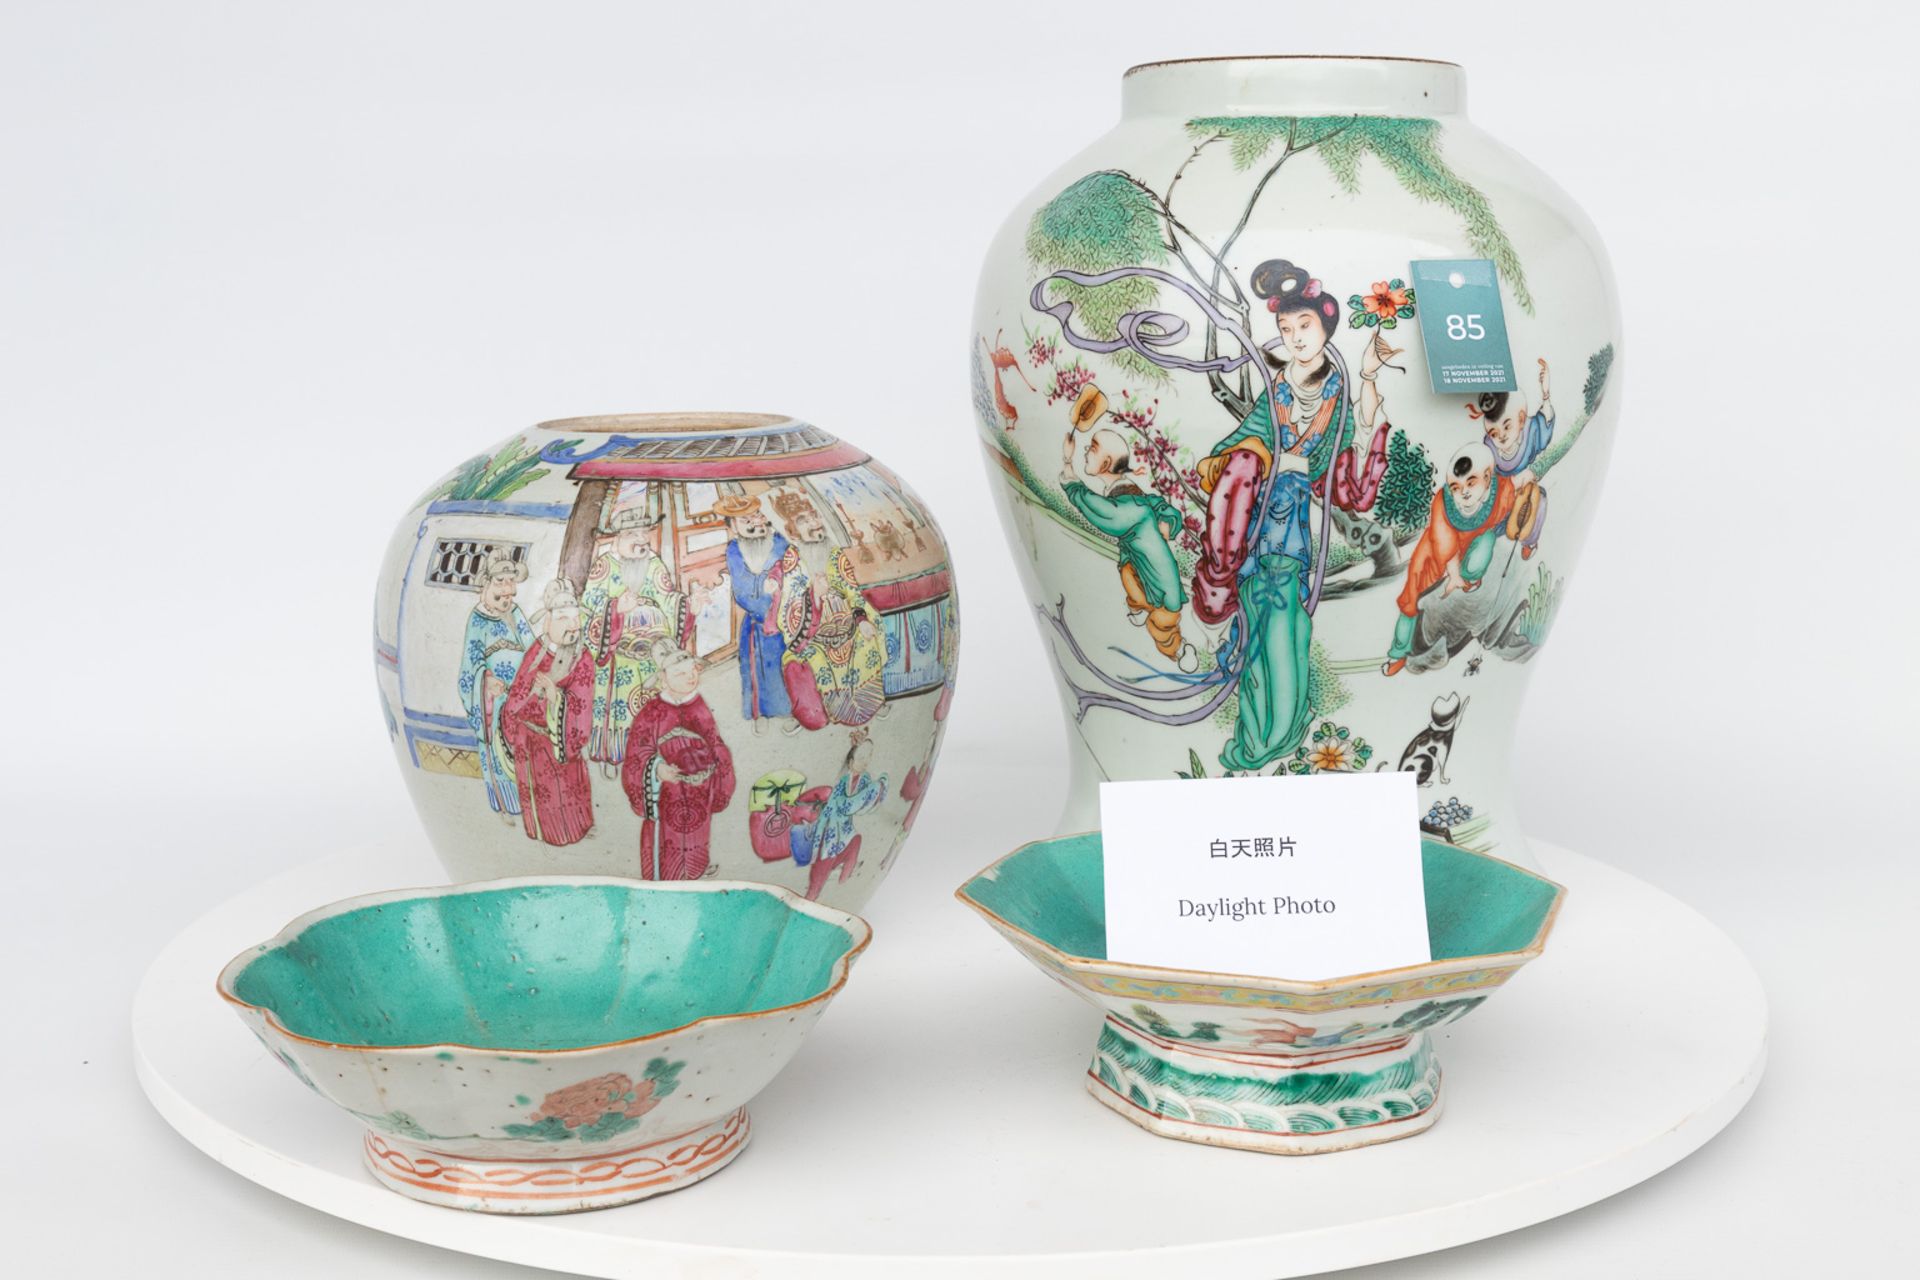 A set of 4 items made of Chinese porcelain. 2 small bowls and 2 ginger jars without lids. - Image 21 of 23